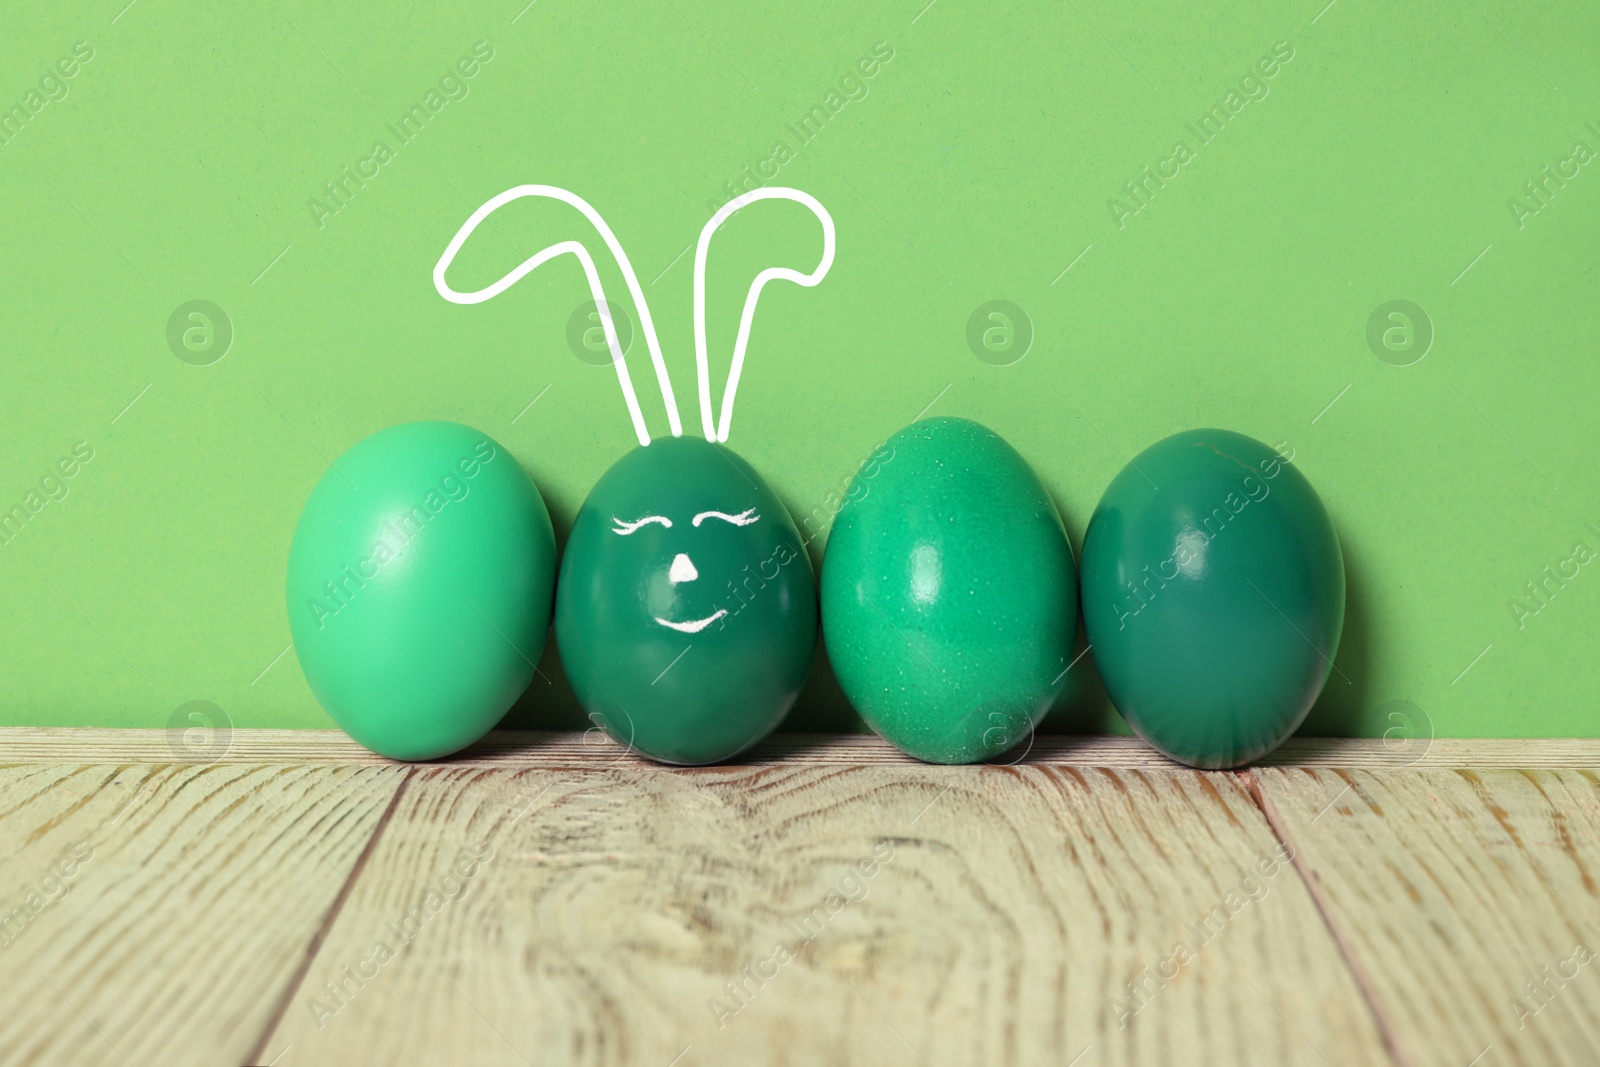 Image of One egg with drawn face and ears as Easter bunny among others on white wooden table against green background